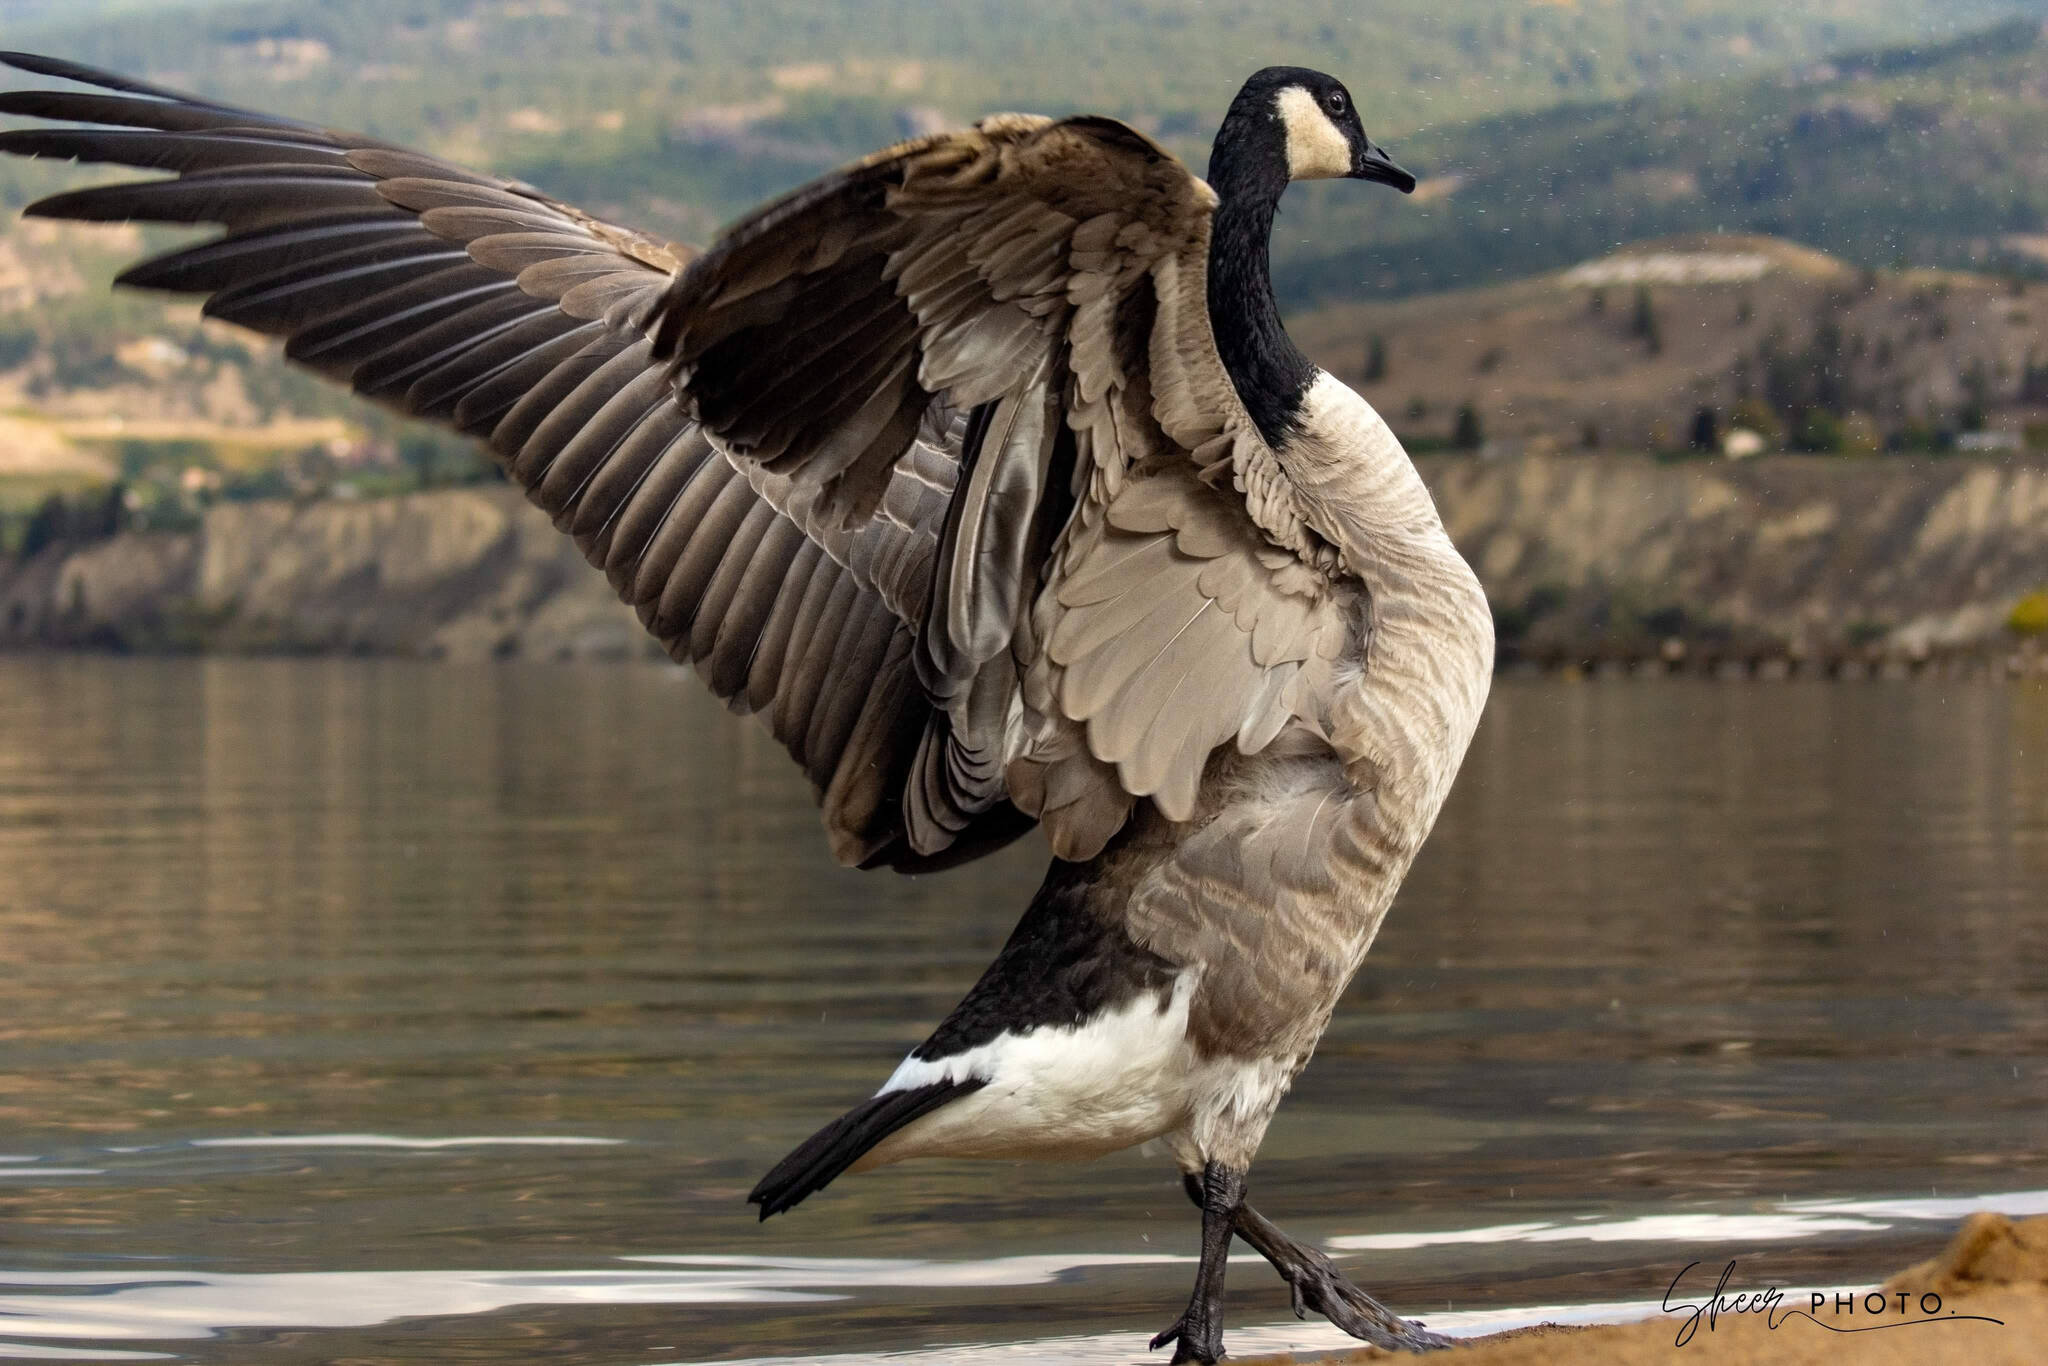 Photographer Steve Heer captured Penticton’s famous Canada goose Kevin spreading his wings at Okanagan Lake. To see more of Heer’s photography go to @sheer.photo on Instagram. (Steve Heer photo)